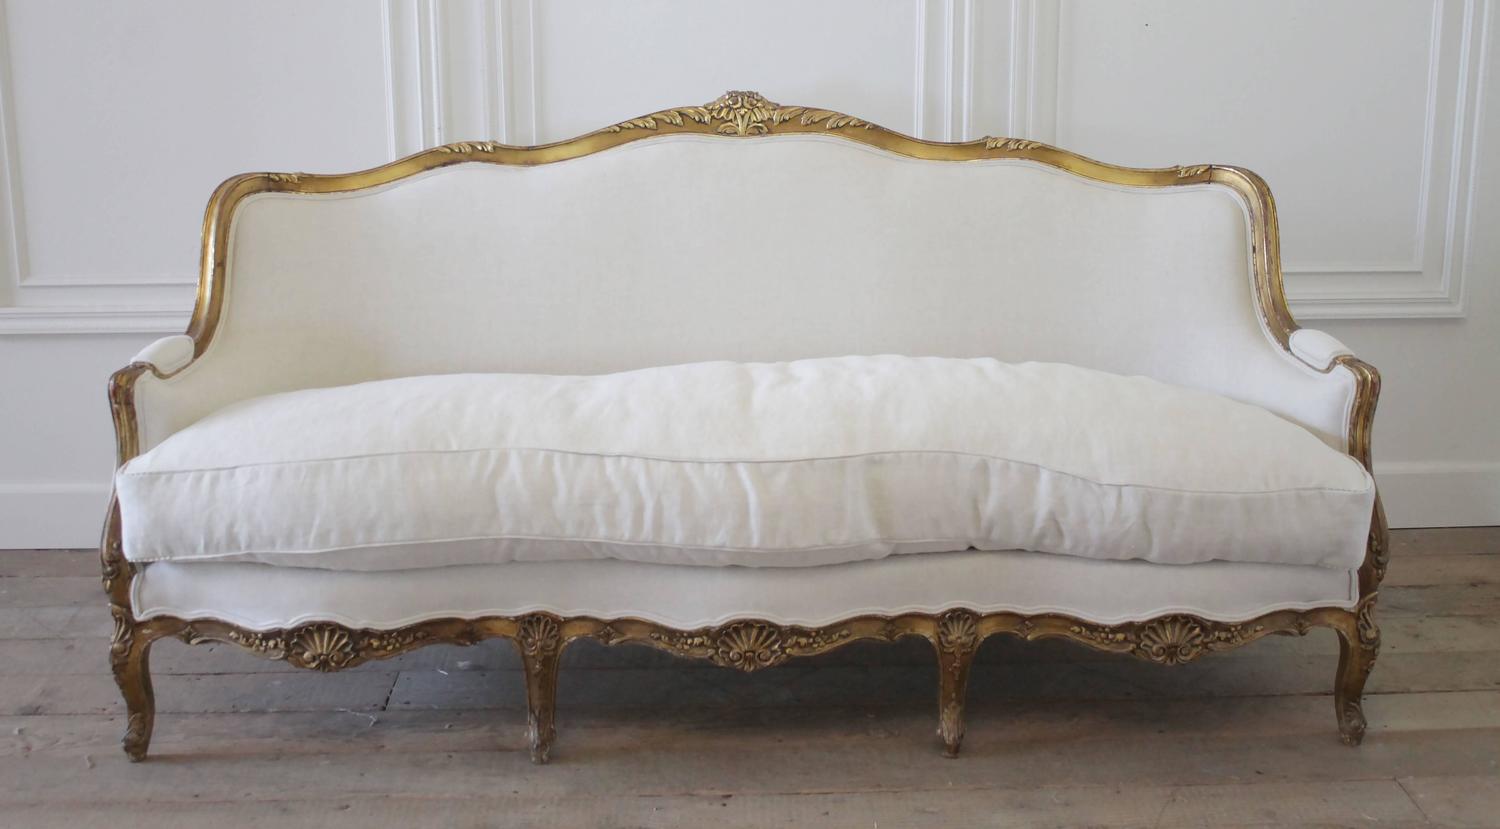 19th Century Louis XV French Giltwood Rococo Sofa in Belgian Linen at 1stdibs